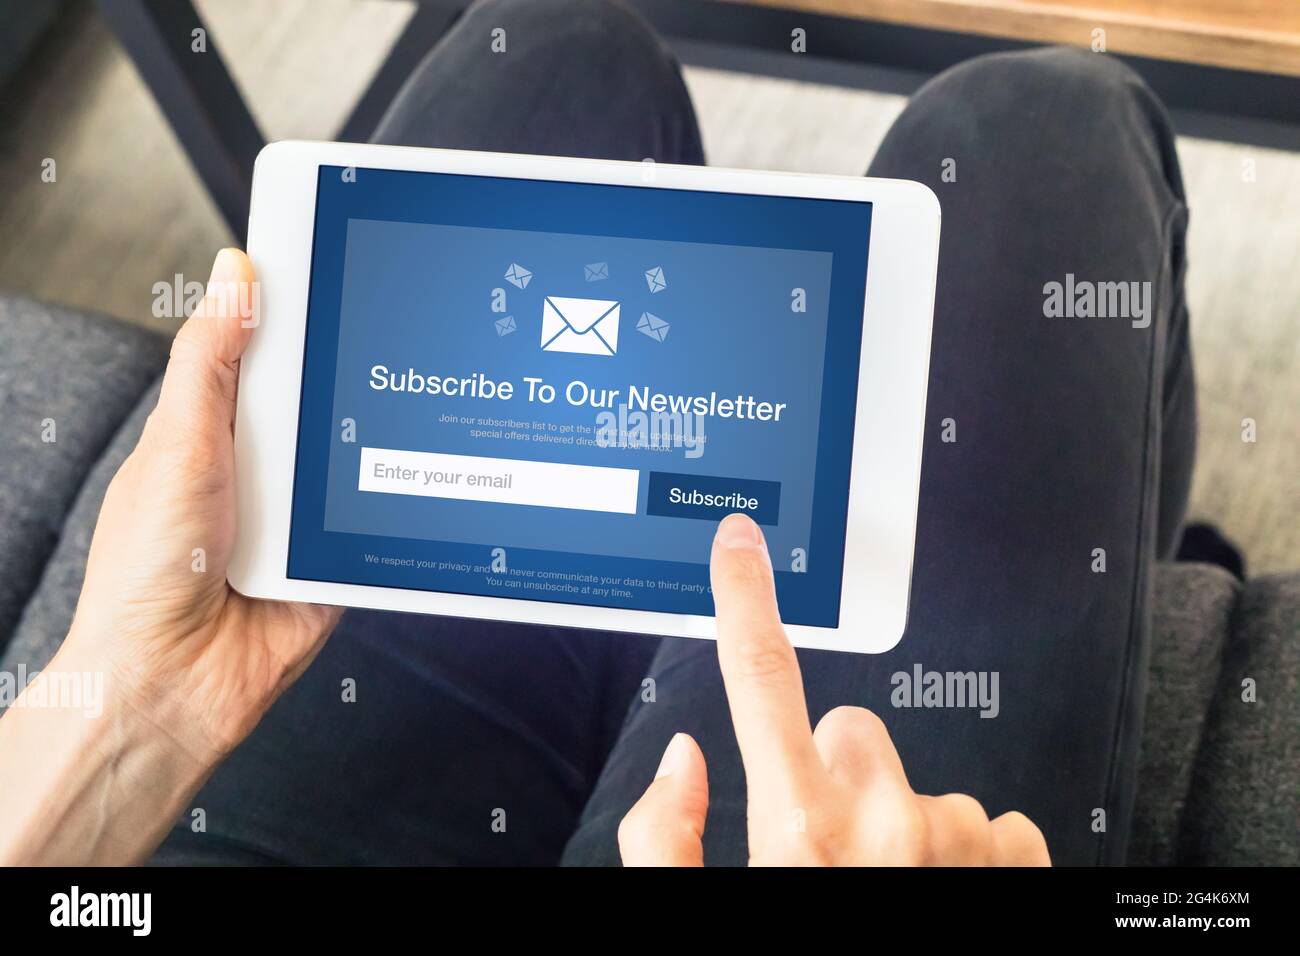 Subscribe to newsletter form on tablet computer screen to join list of susbscribers and receive exclusive offers and update. Digital communication mar Stock Photo